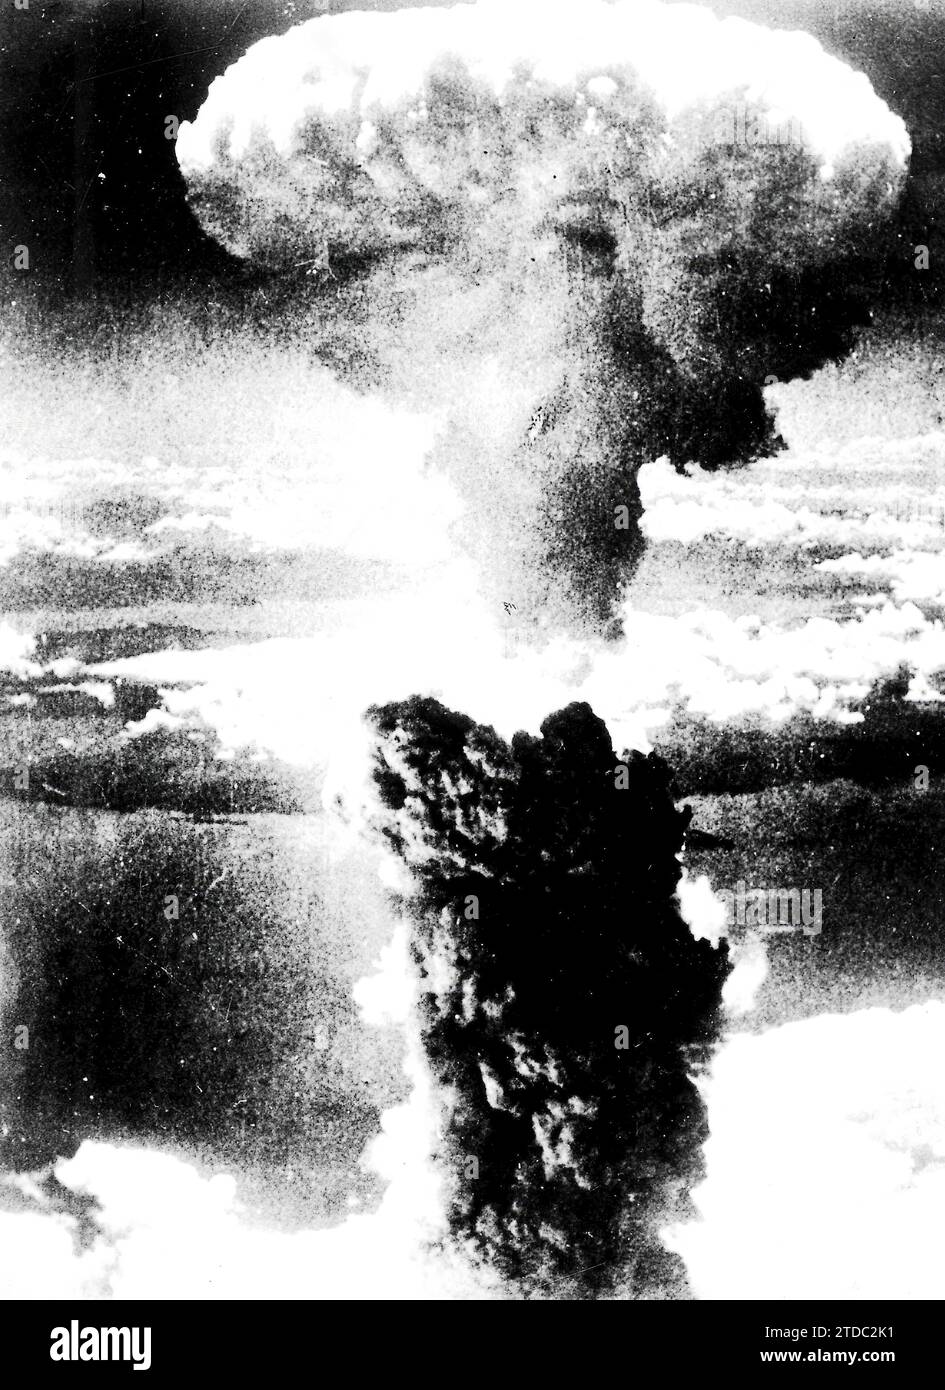 08/06/1945. The nuclear 'mushroom' after the bomb explosion over Hiroshima. Credit: Album / Archivo ABC Stock Photo